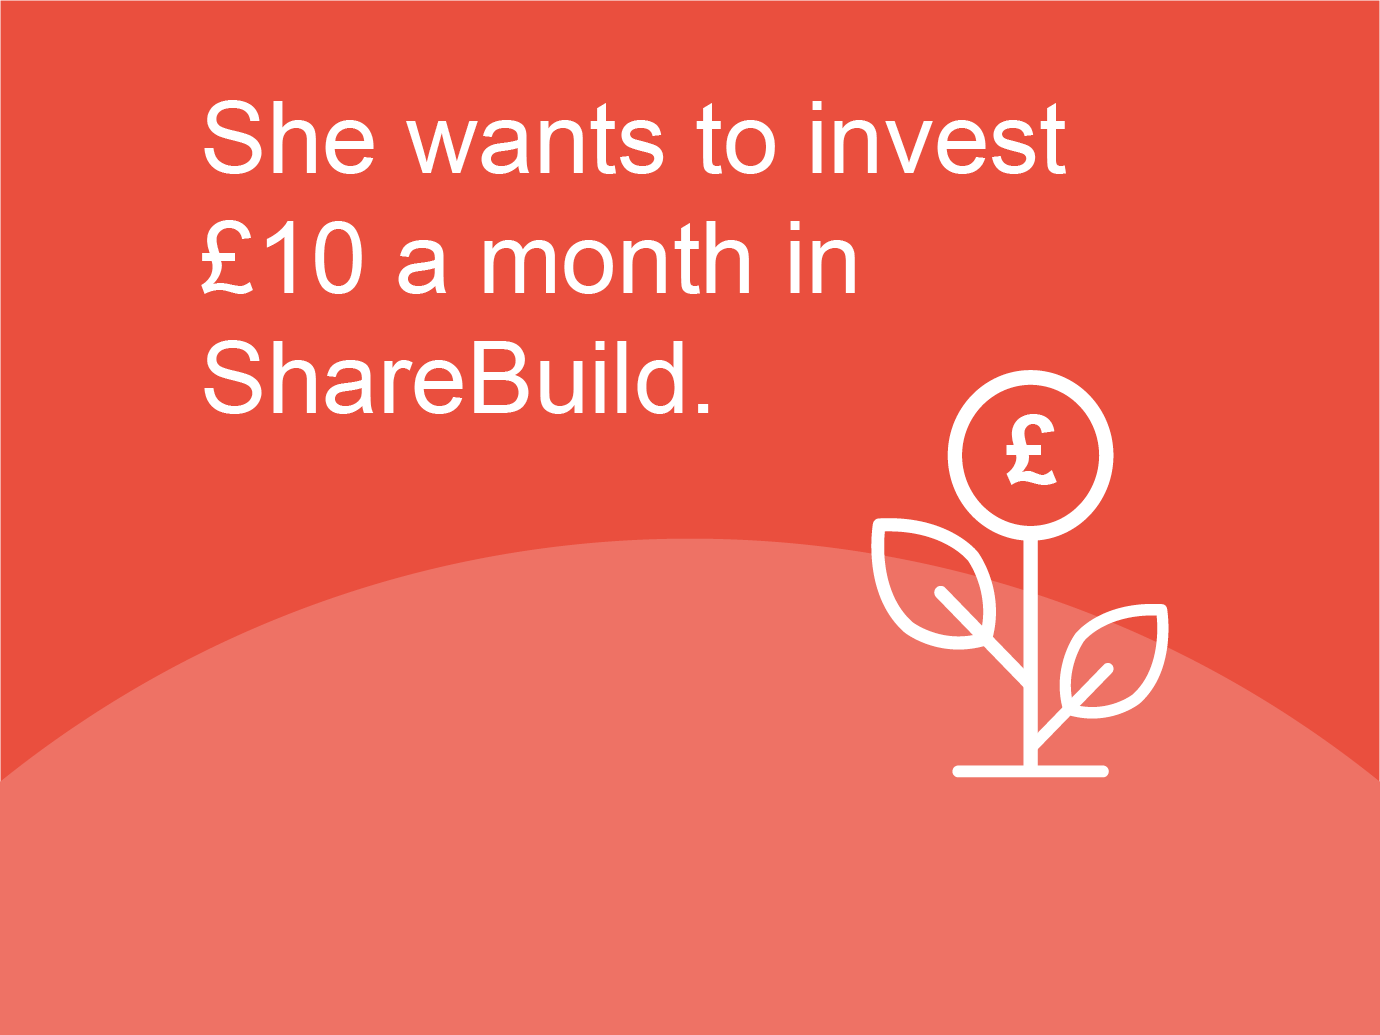 She wants to invest £10 a month in ShareBuild.